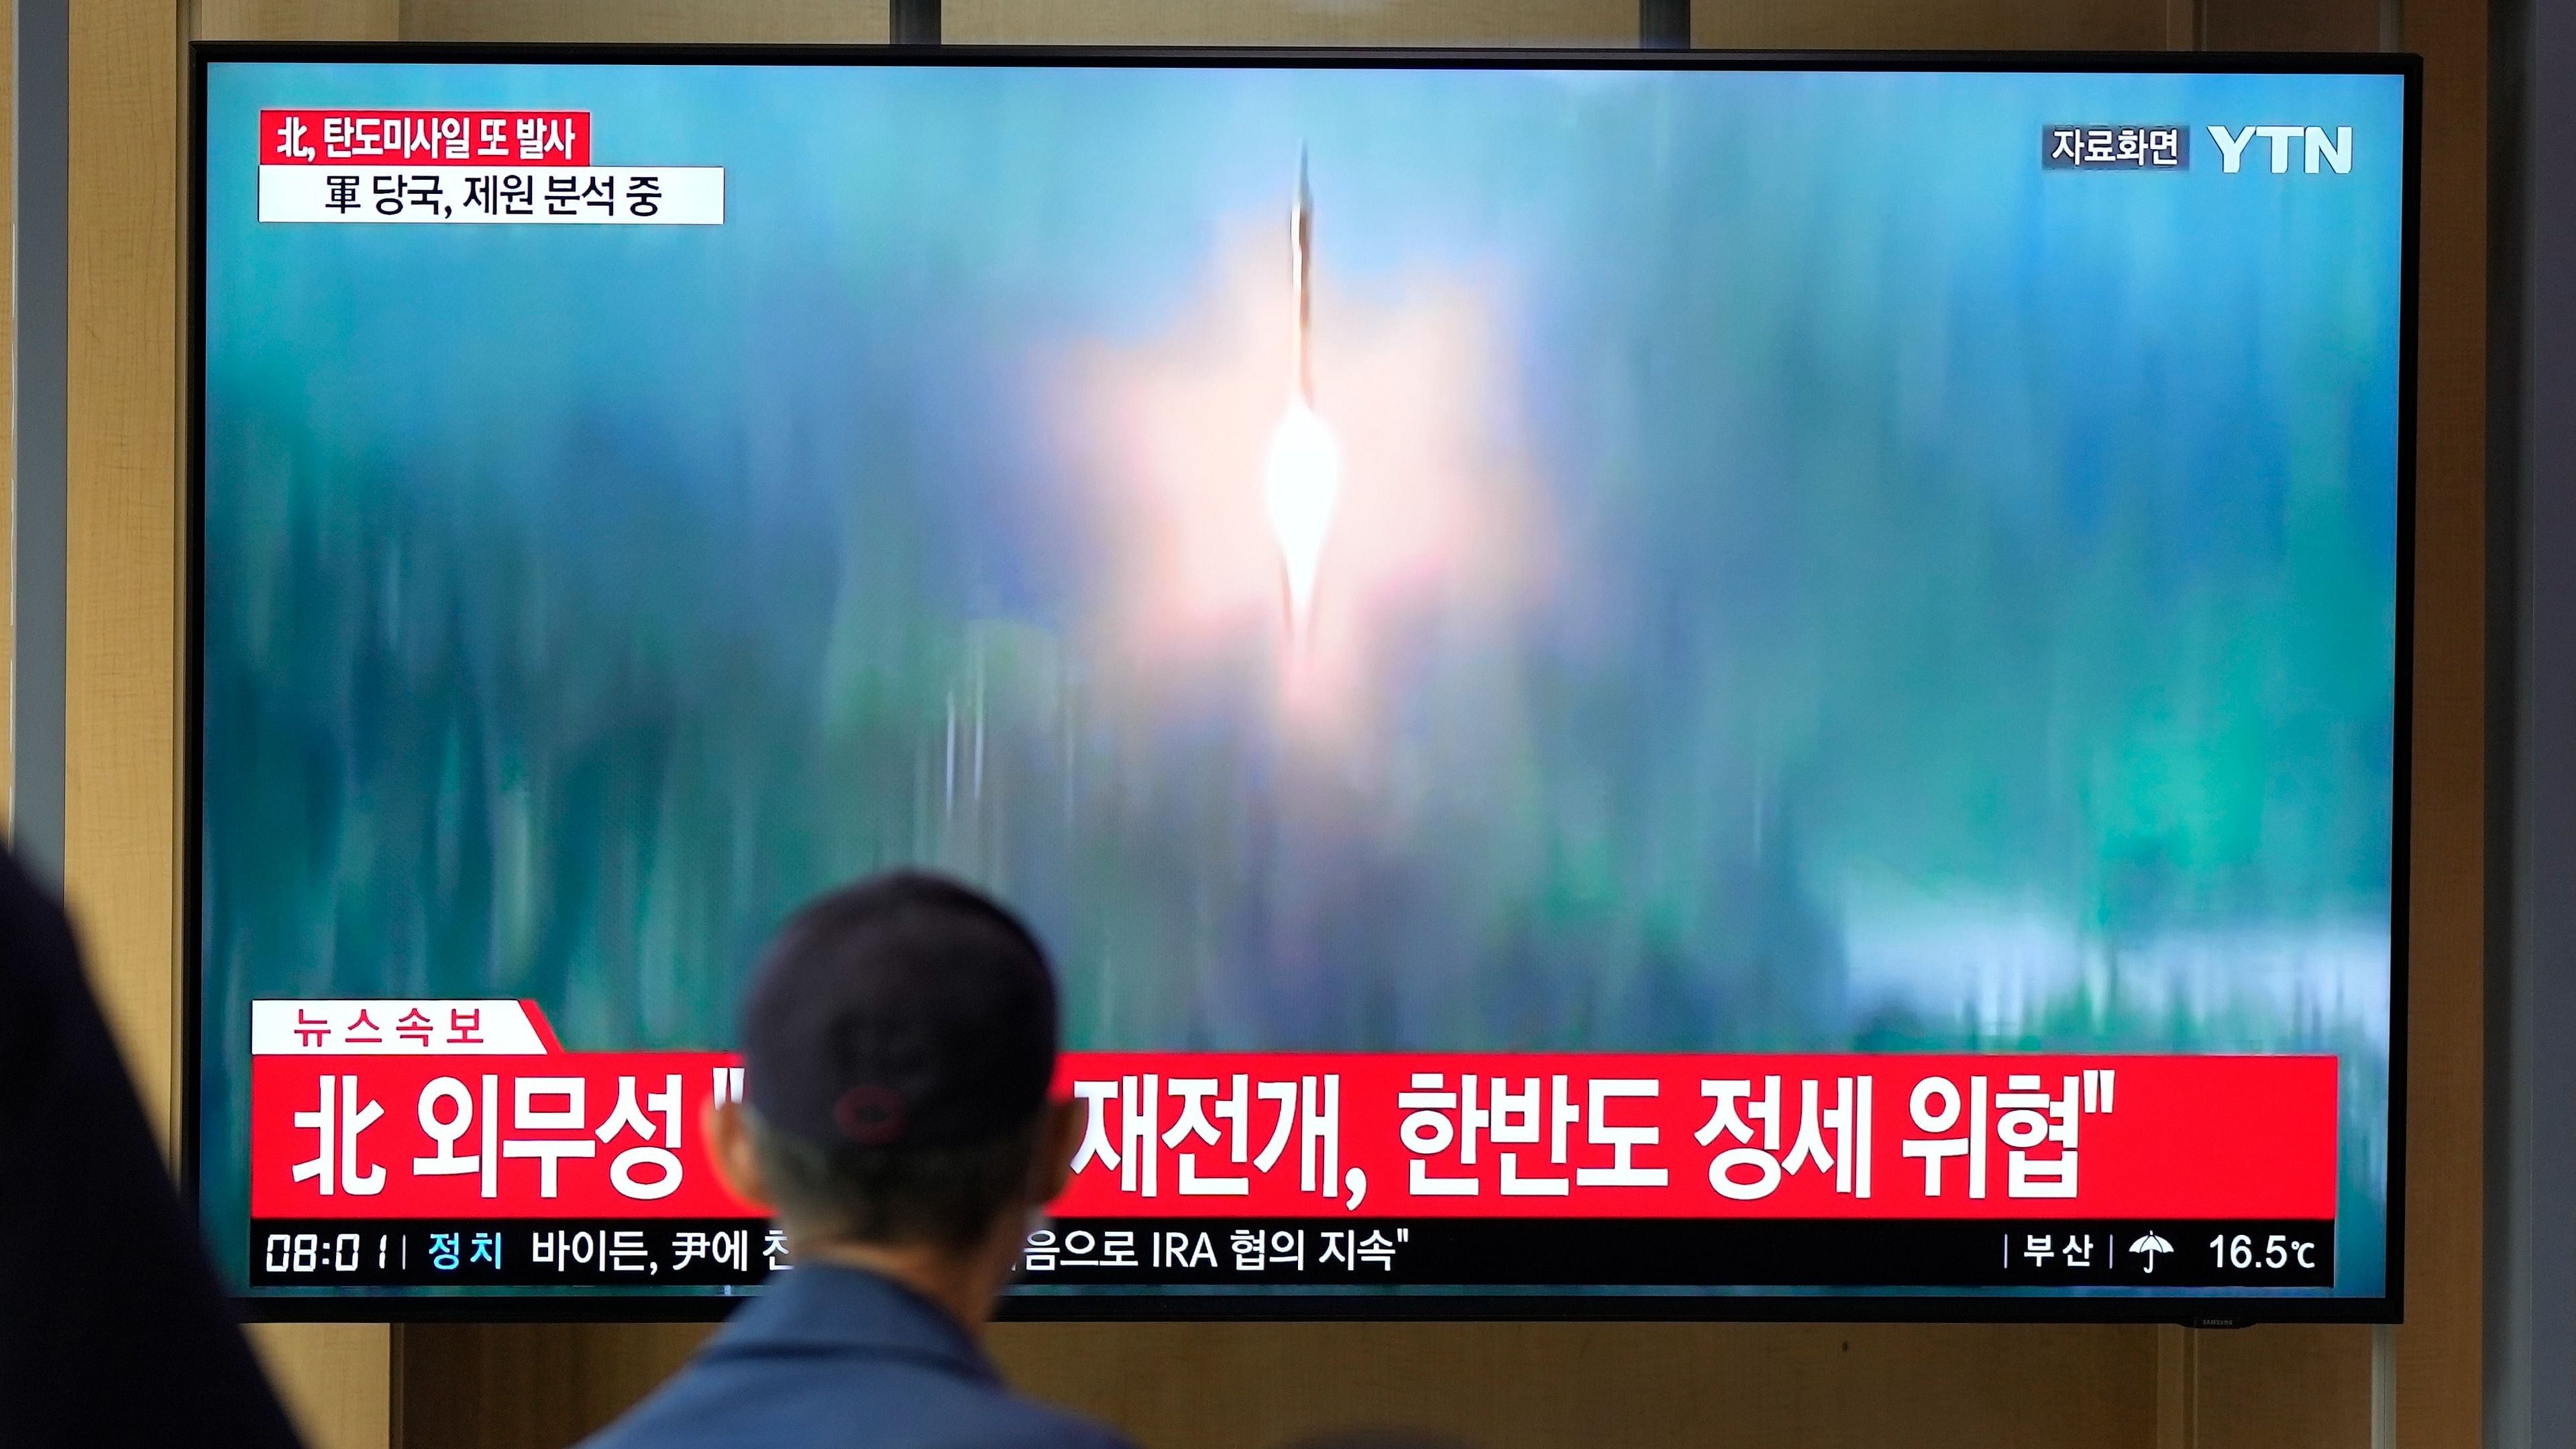 A TV screen showing a news program reporting about North Korea's missile launch with file footage. Credit: AP/ PTI Photo